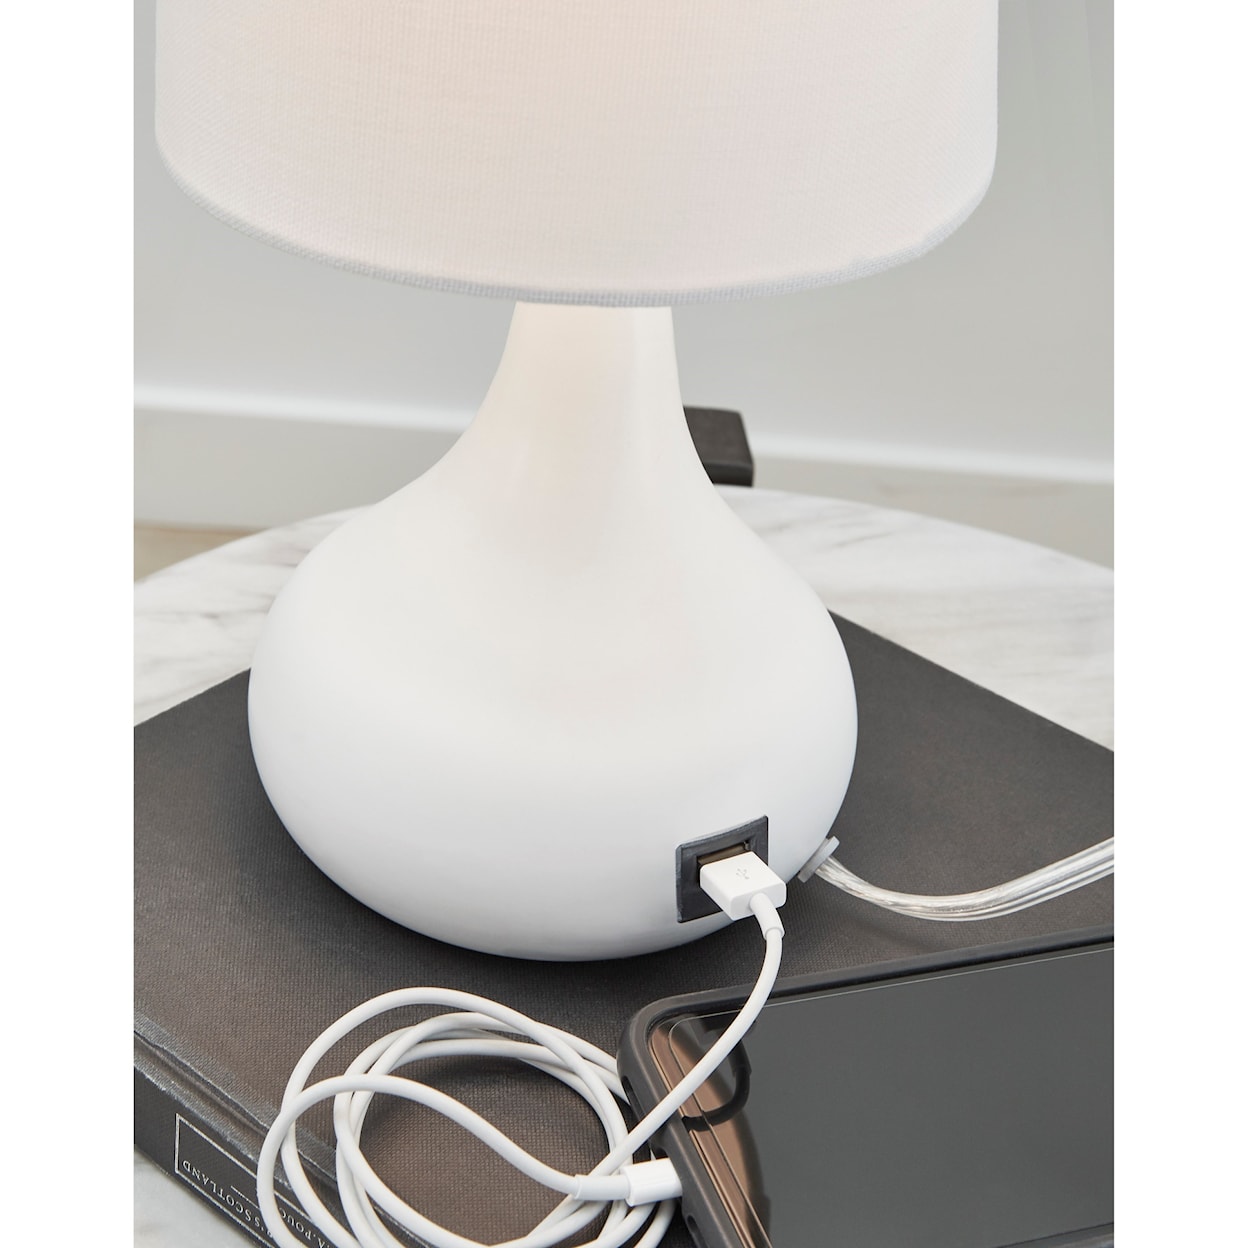 Signature Design by Ashley Lamps - Contemporary Camdale White Metal Table Lamp